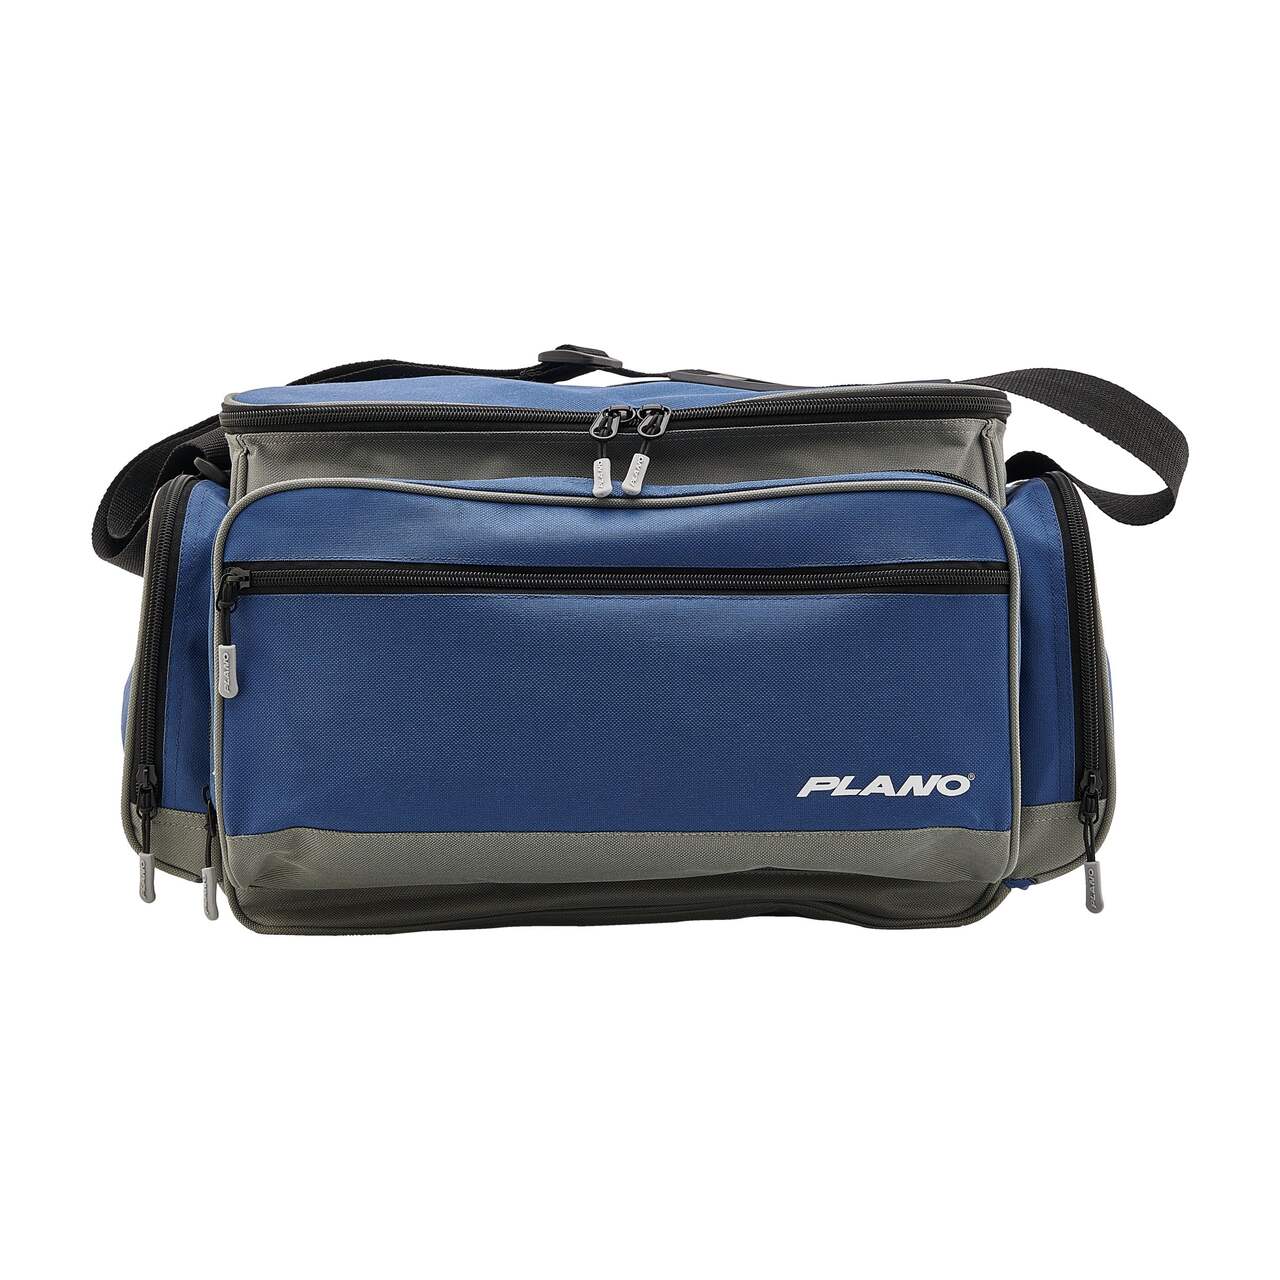 PLANO PRO SERIES TACKLE BAG 3700 PLABP370 Black - Fin Feather Fur Outfitters